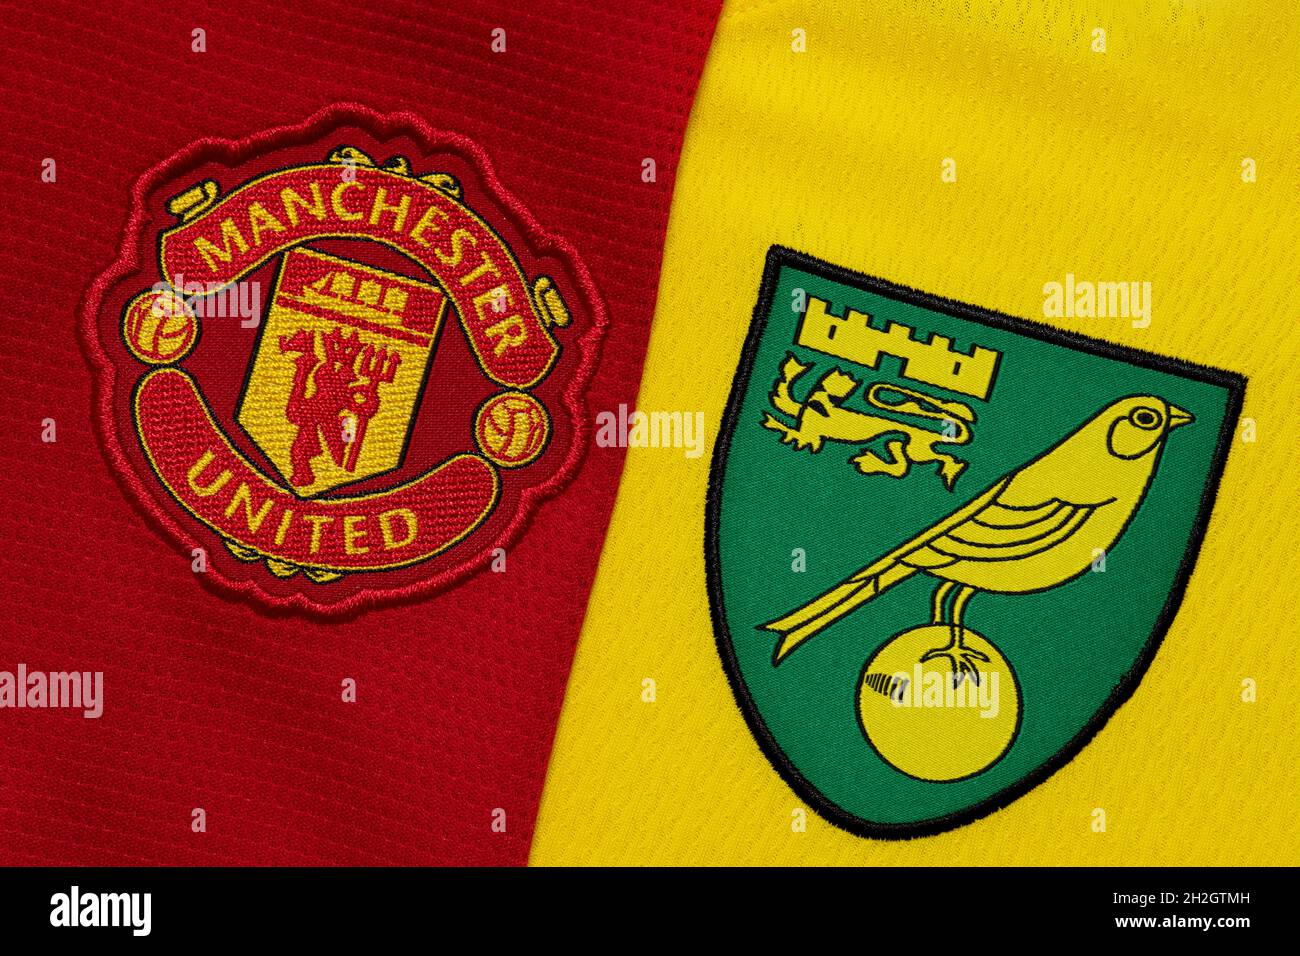 Close up of Man United and Norwich City club crest. Stock Photo